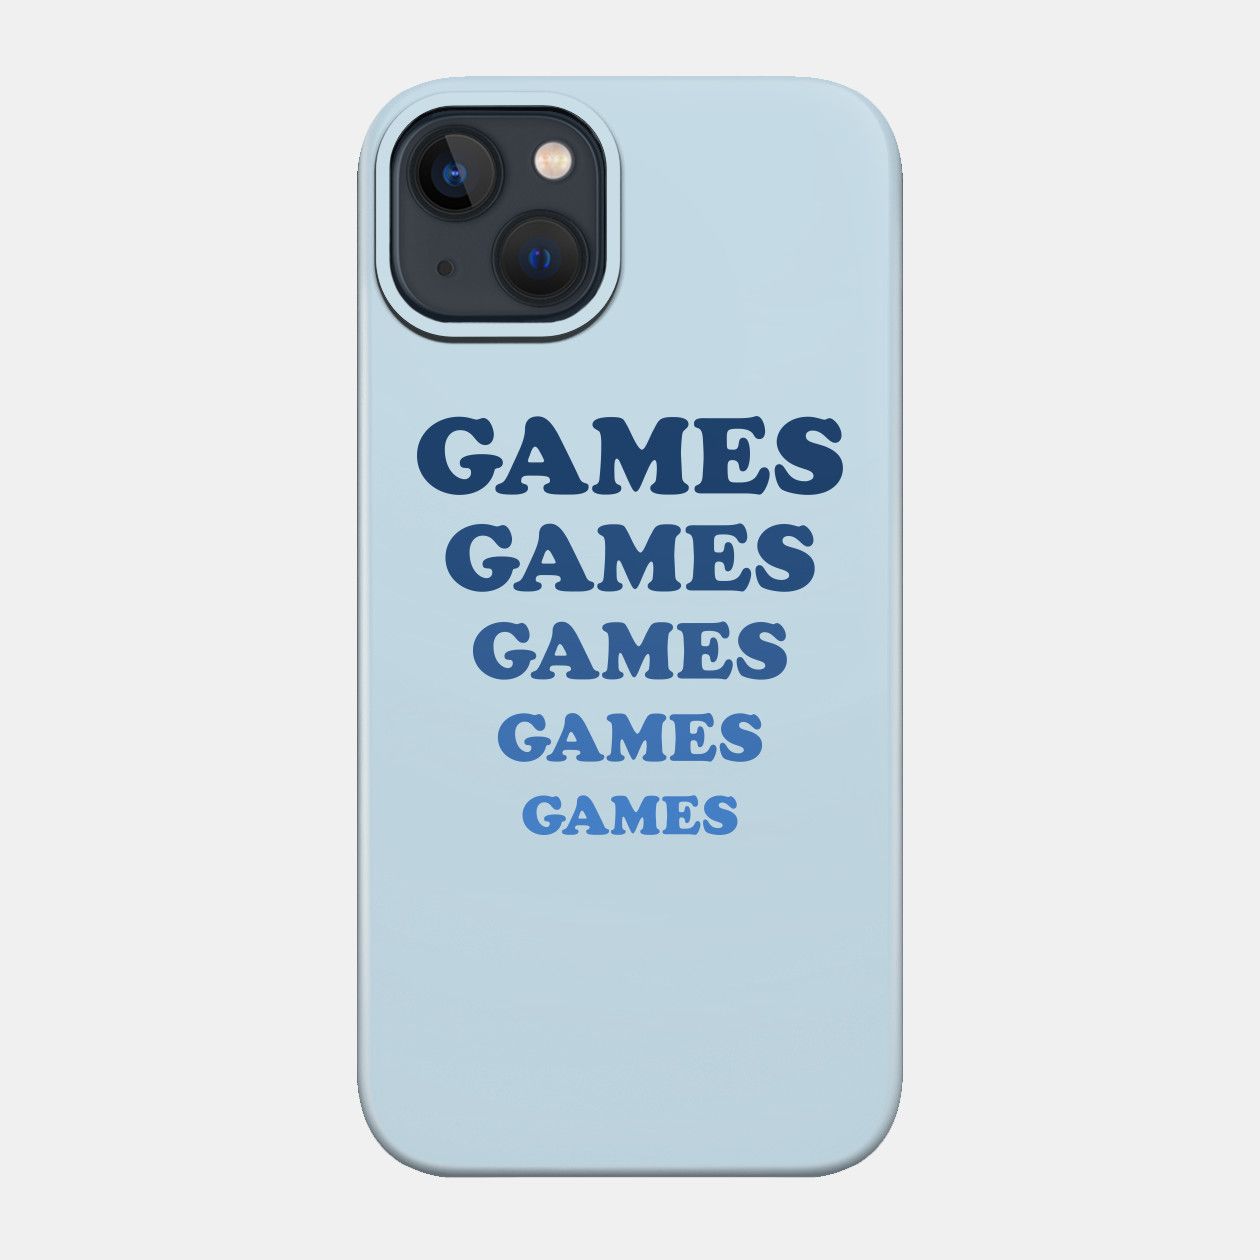 Games Games Games Iphone Case